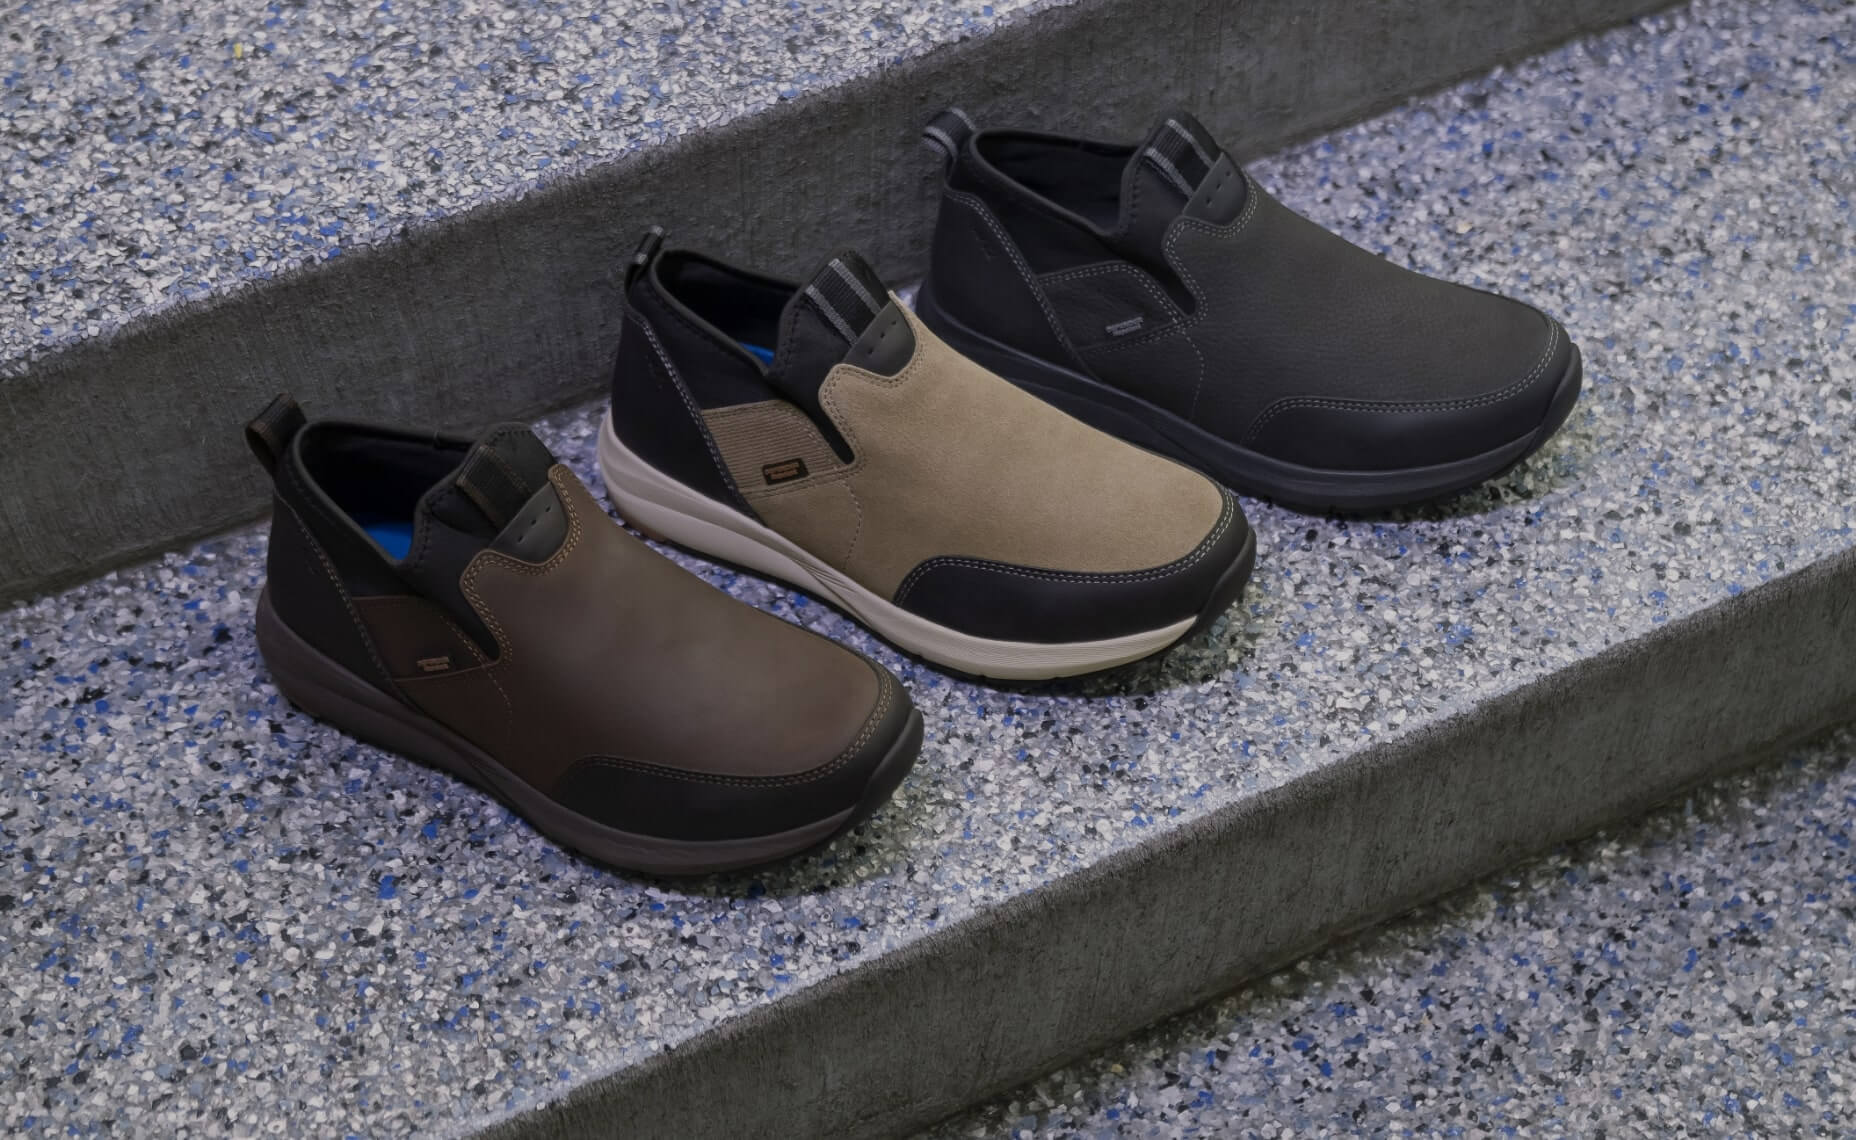 Click to shop Nunn Bush boots. Image features the Excursion Chukka in all 3 colorways. 